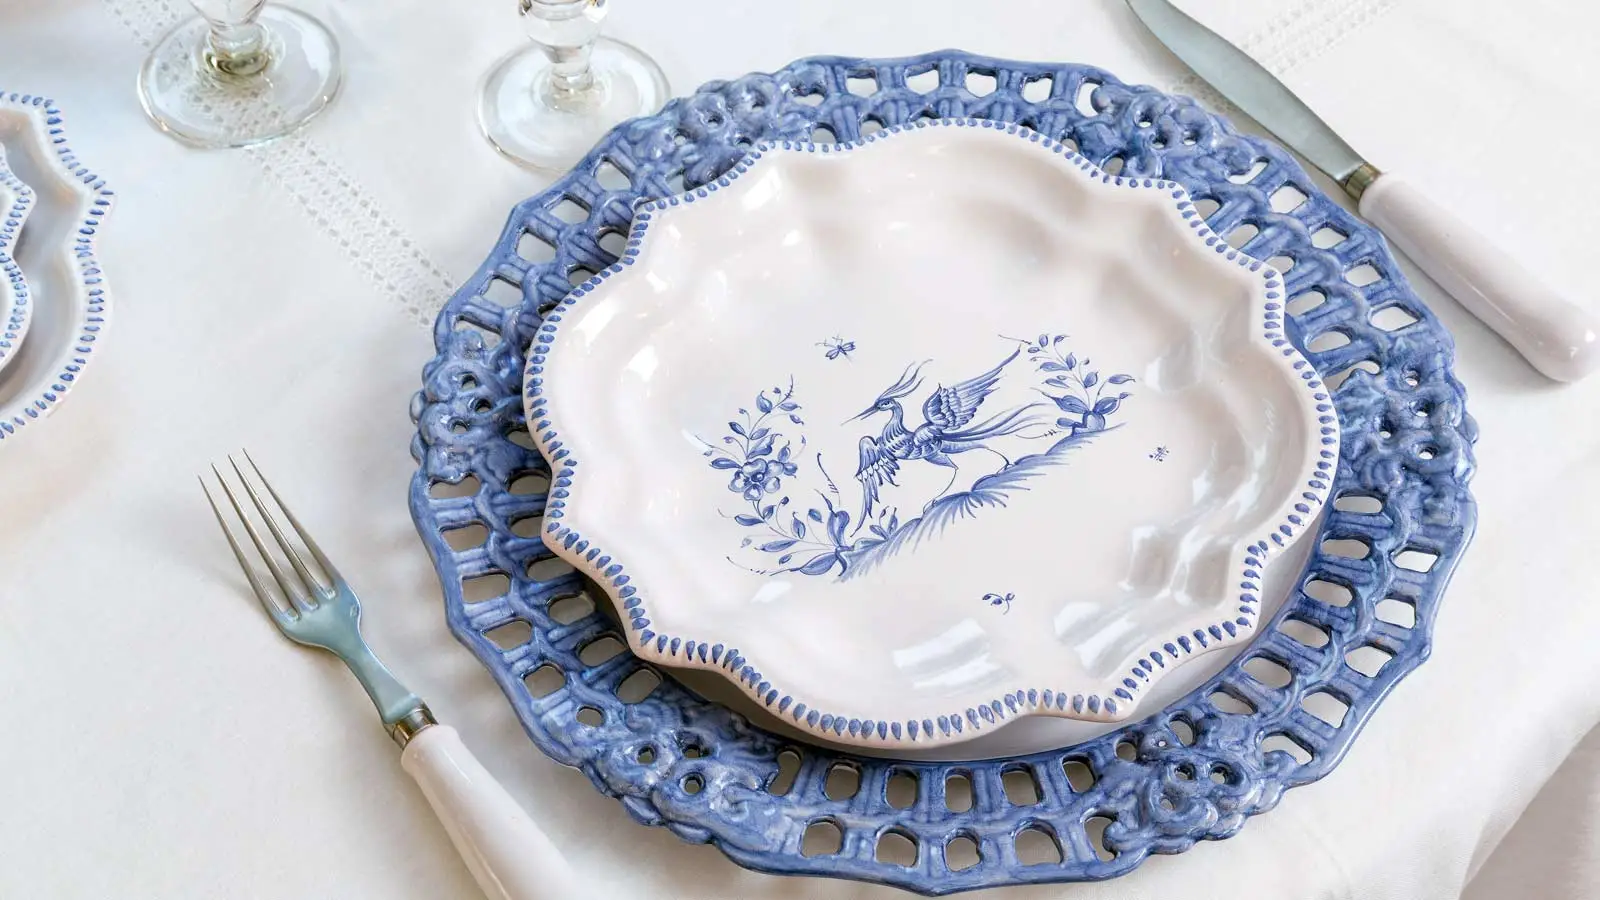 Pearled candy dish on lace plate